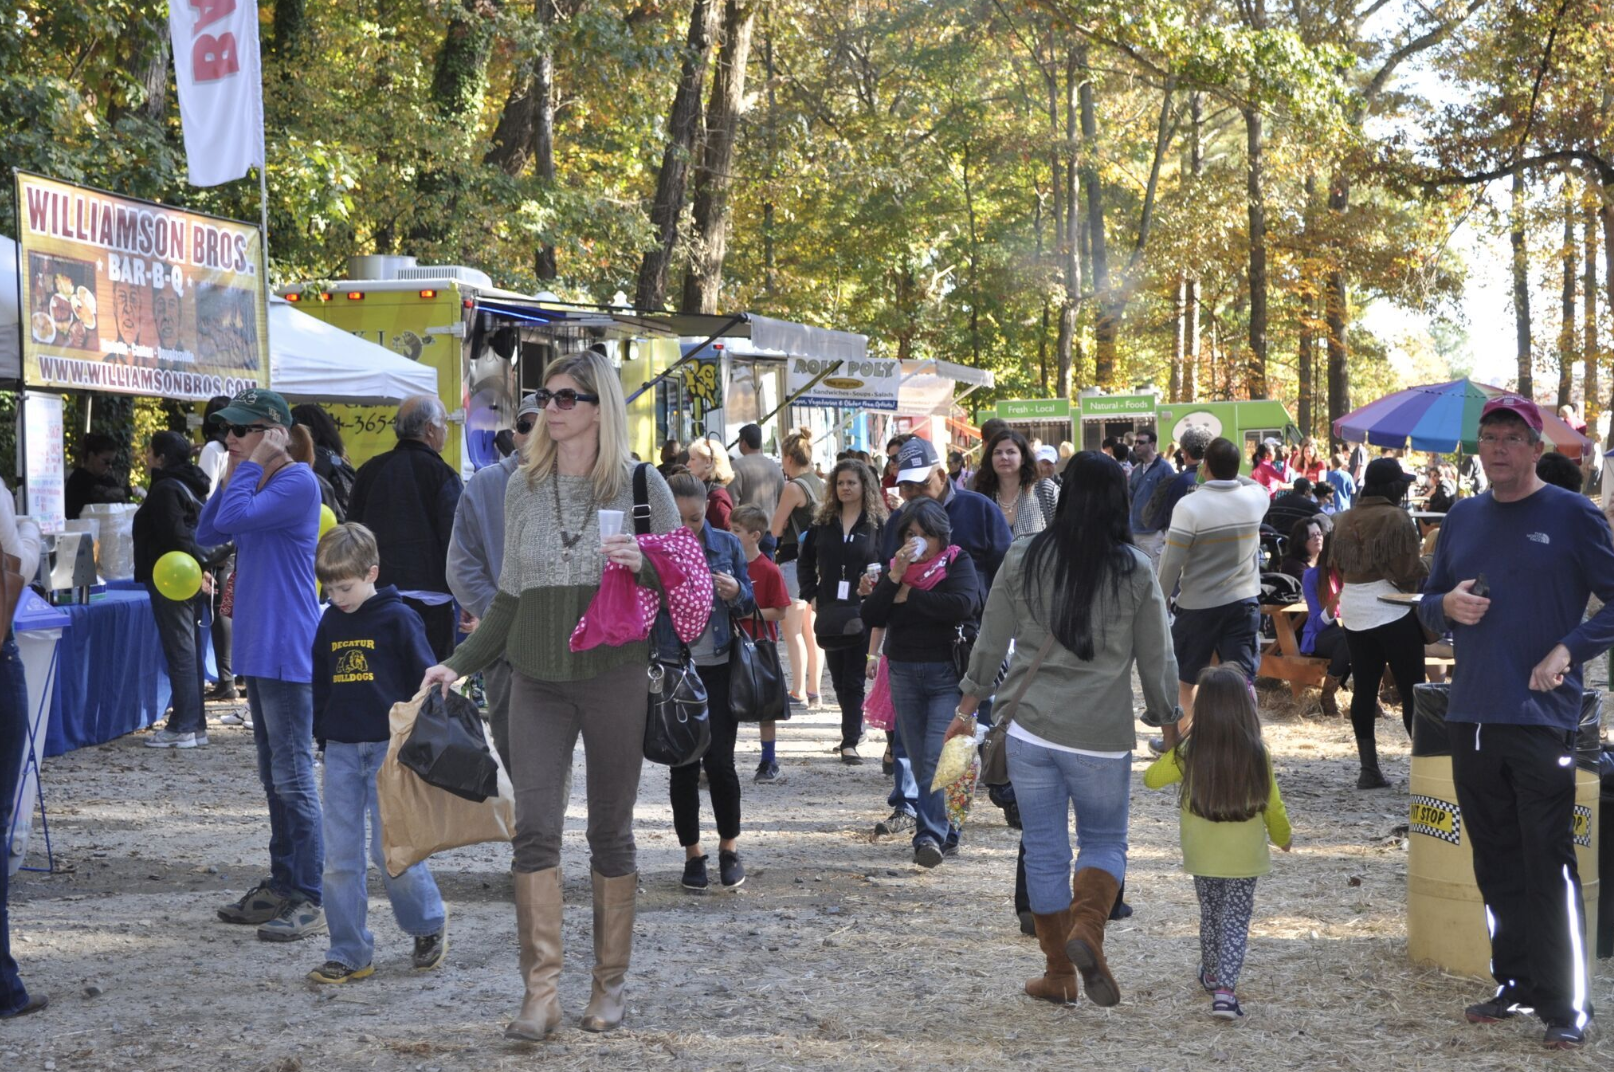 Jump Into Fall Festival Fun With the Atlanta Foundation for Public Spaces